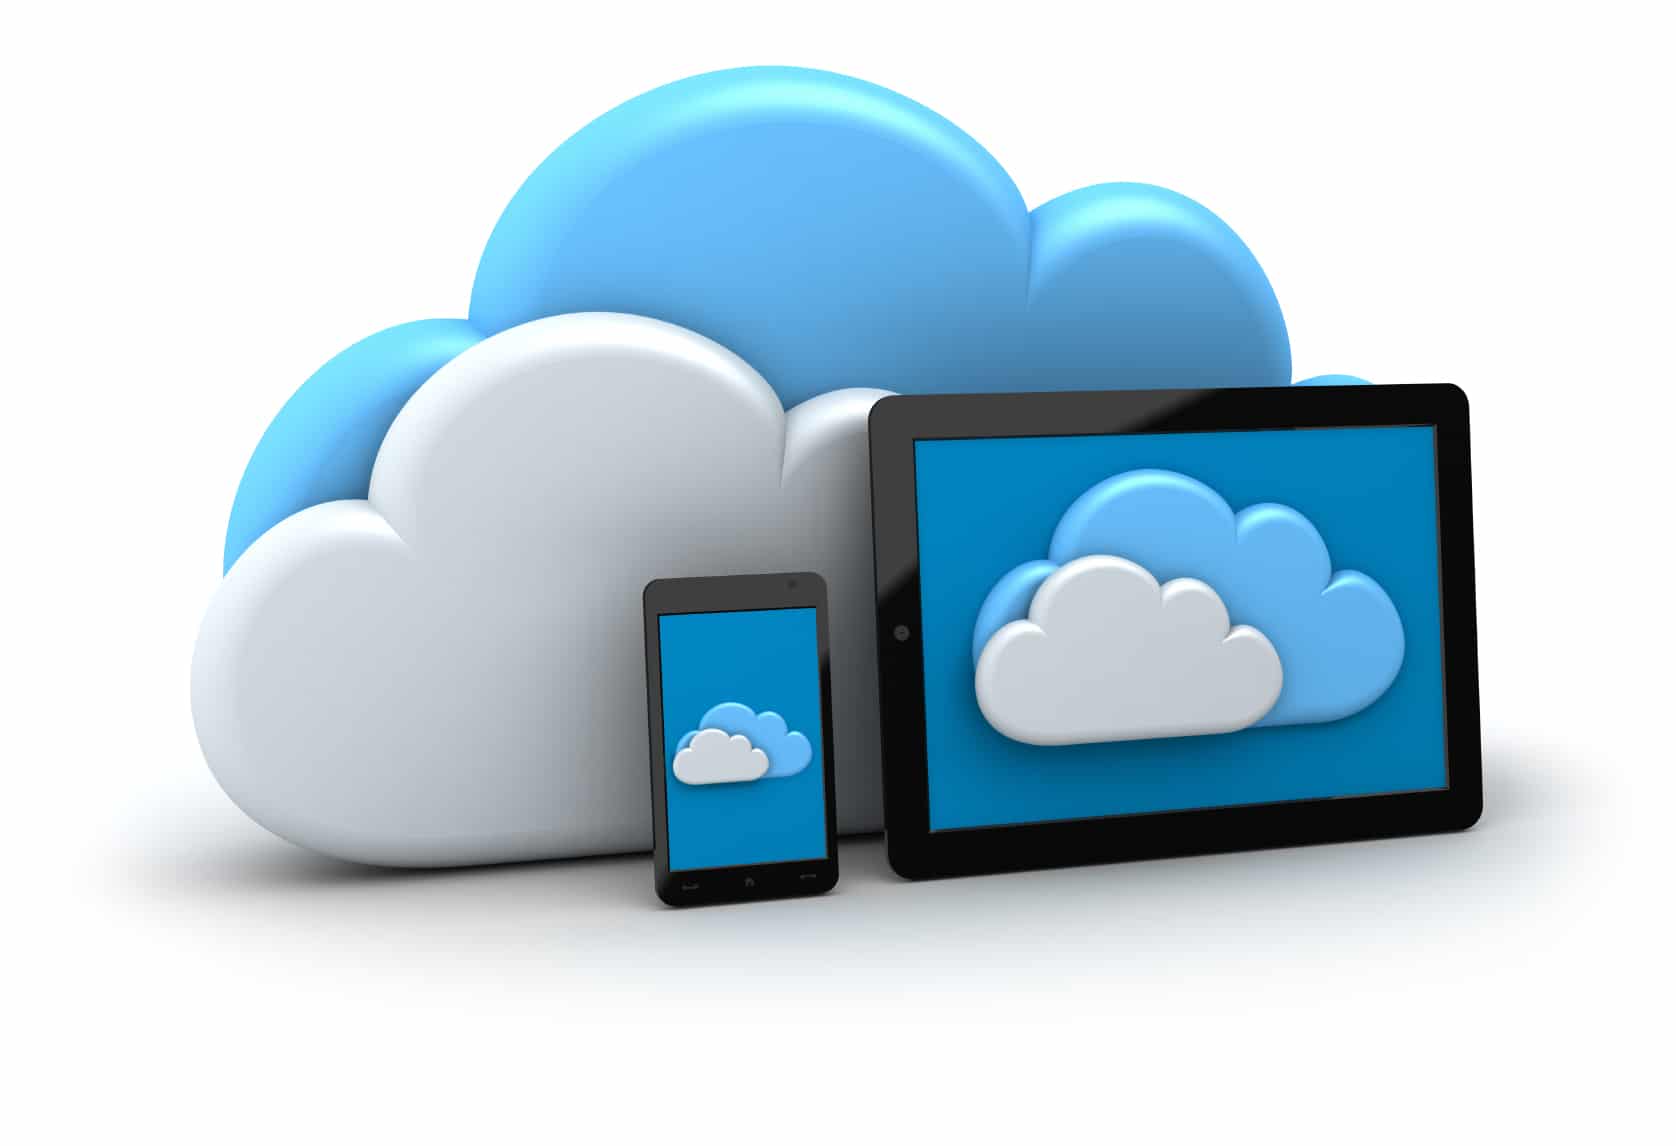 Storing files in the cloud? Thinking of using OneDrive or DropBox or something else? We can help!